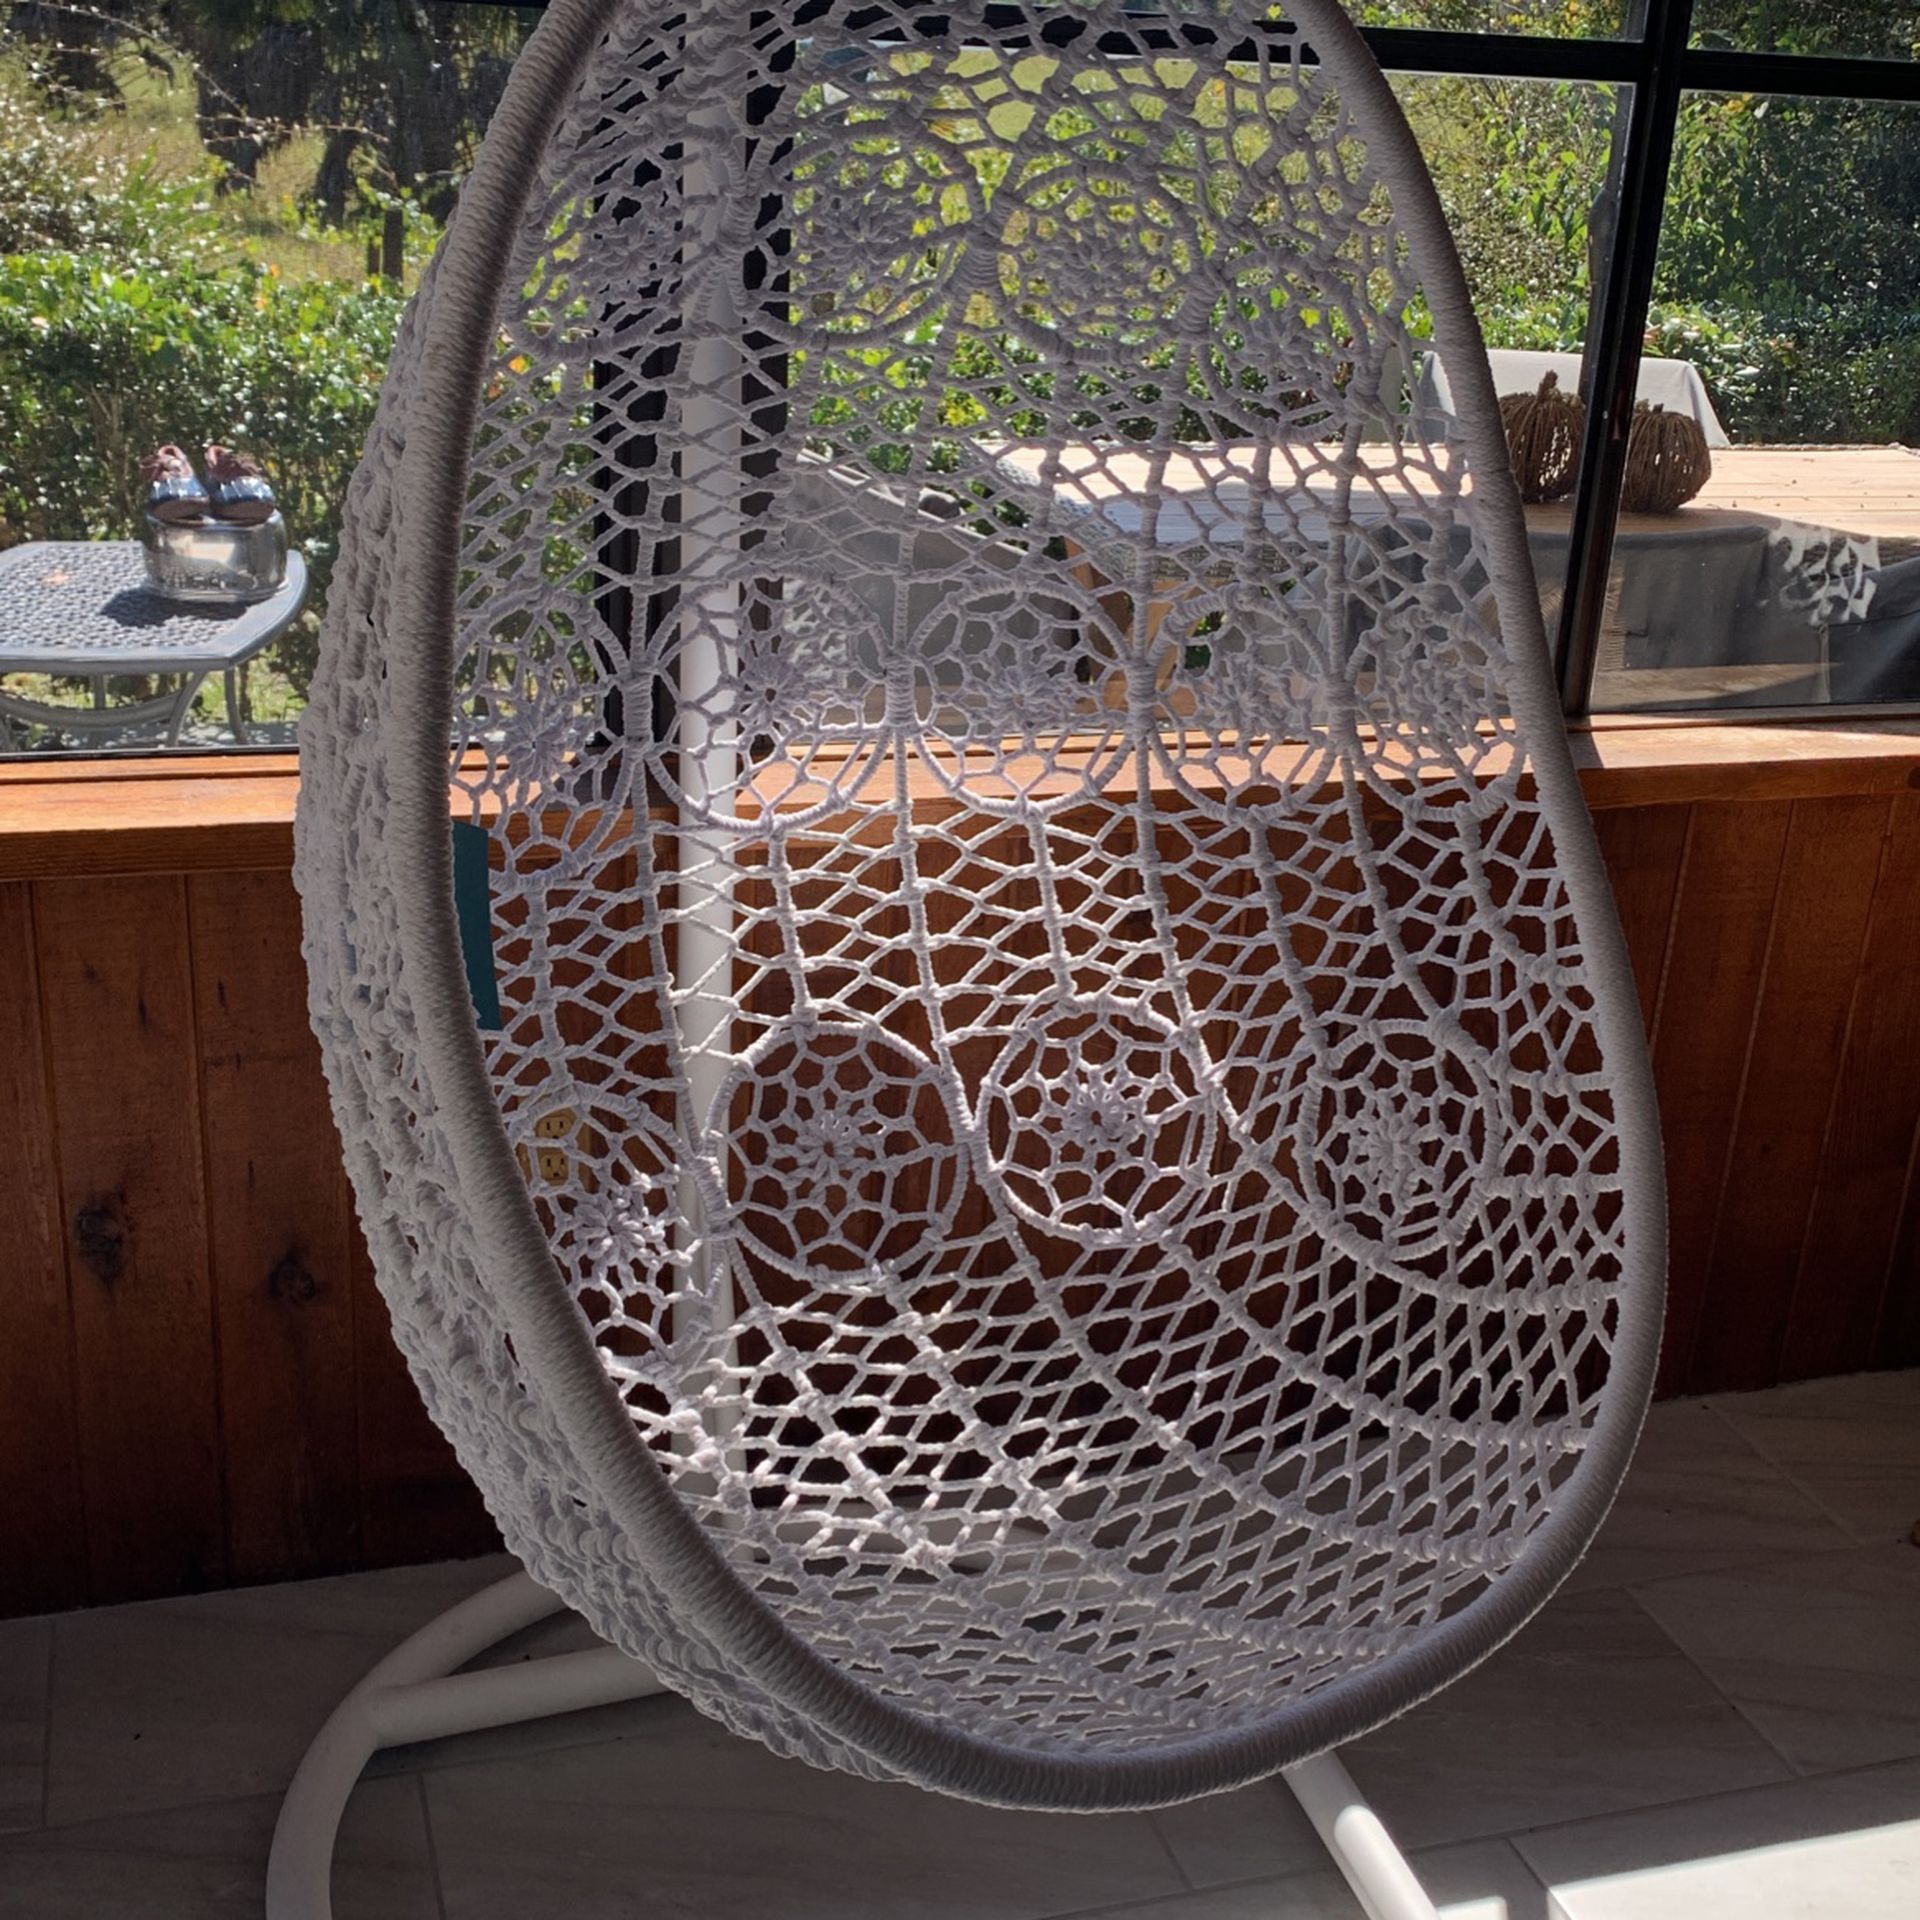 Egg Hanging Chair. New!  White Stand And Hanging Basket. Beautiful! Cream Cushion Included Not Black Pillows. Beautifully! 